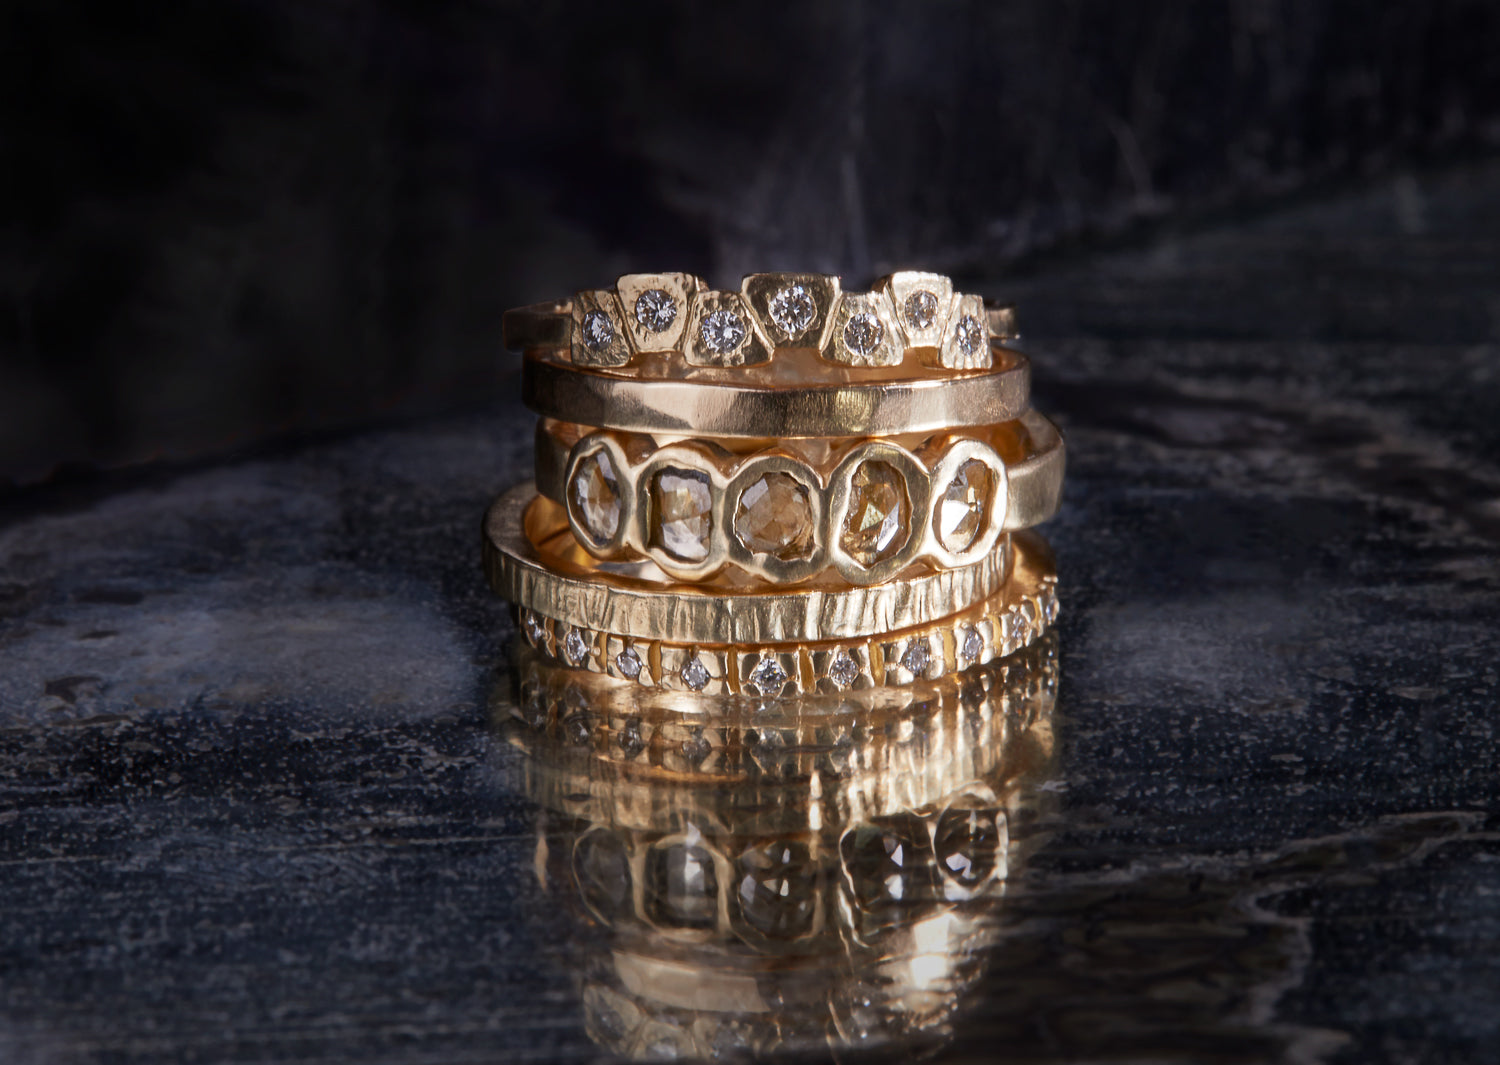 The Coral ring features 7 white diamonds flush set in textured 14k gold, with a hammered band.